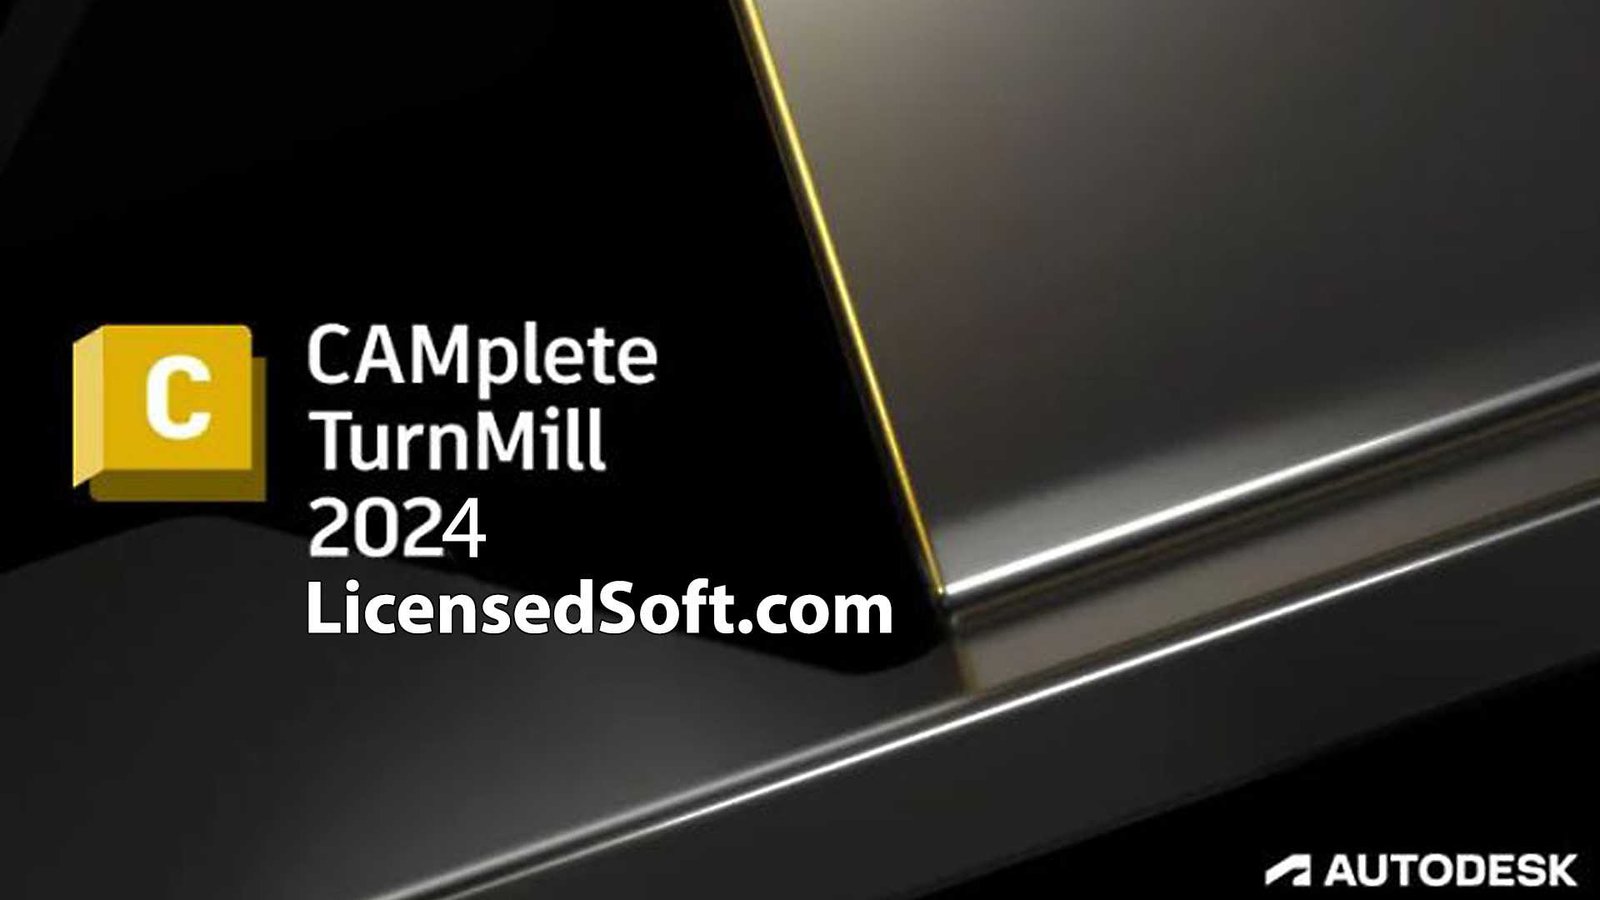 Autodesk CAMplete TurnMill 2024 Lifetime License Cover Image By LicensedSoft